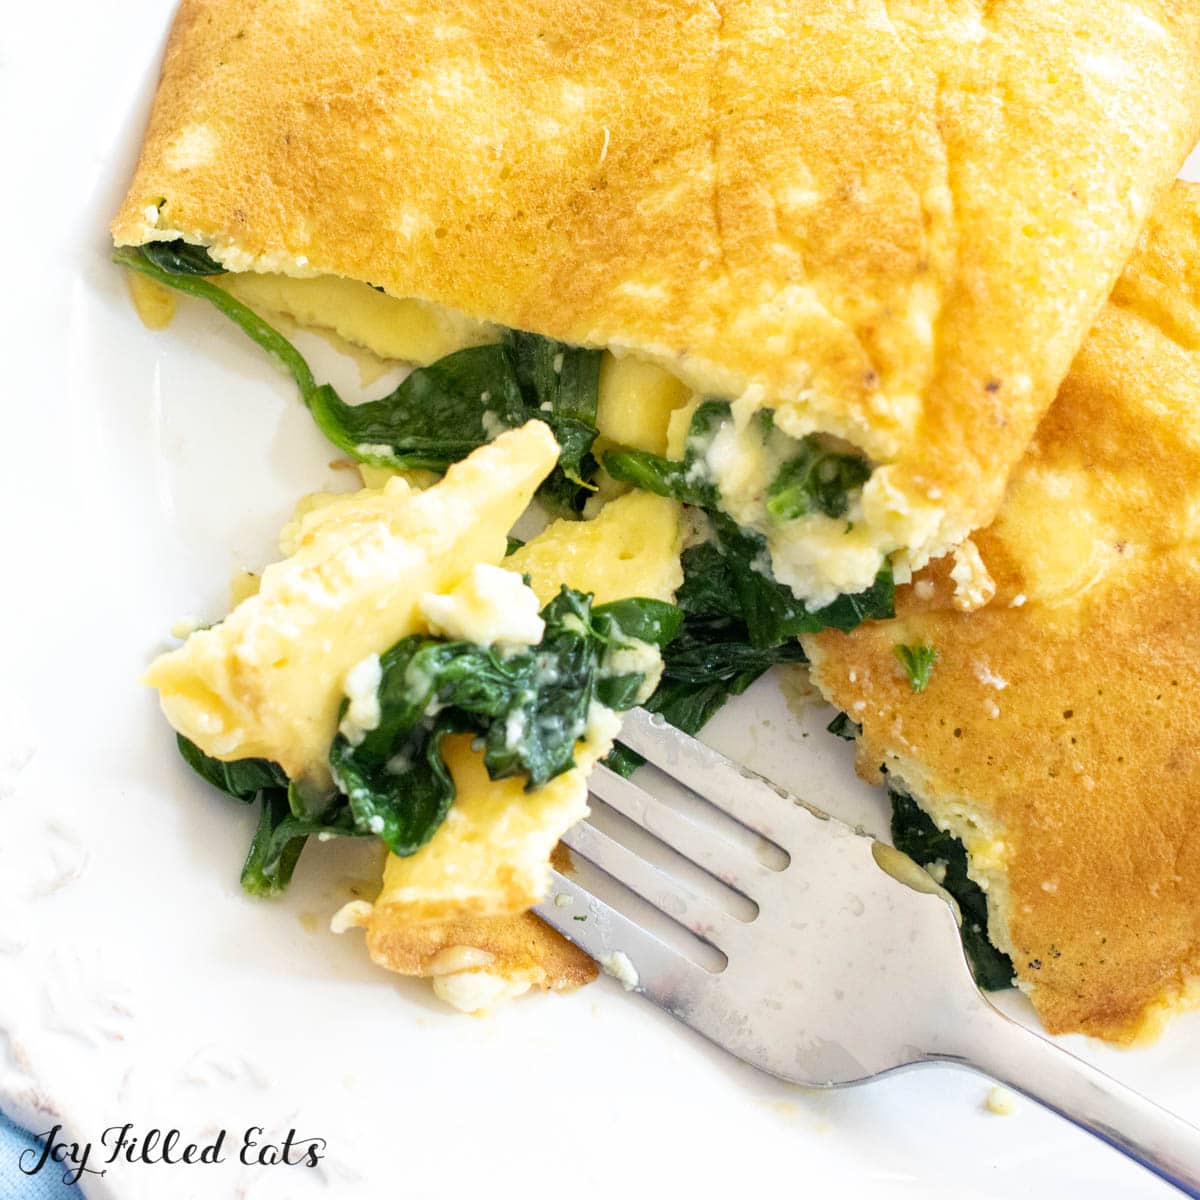 How To Make A Spinach Feta Omelet (With Step By Step Photos)